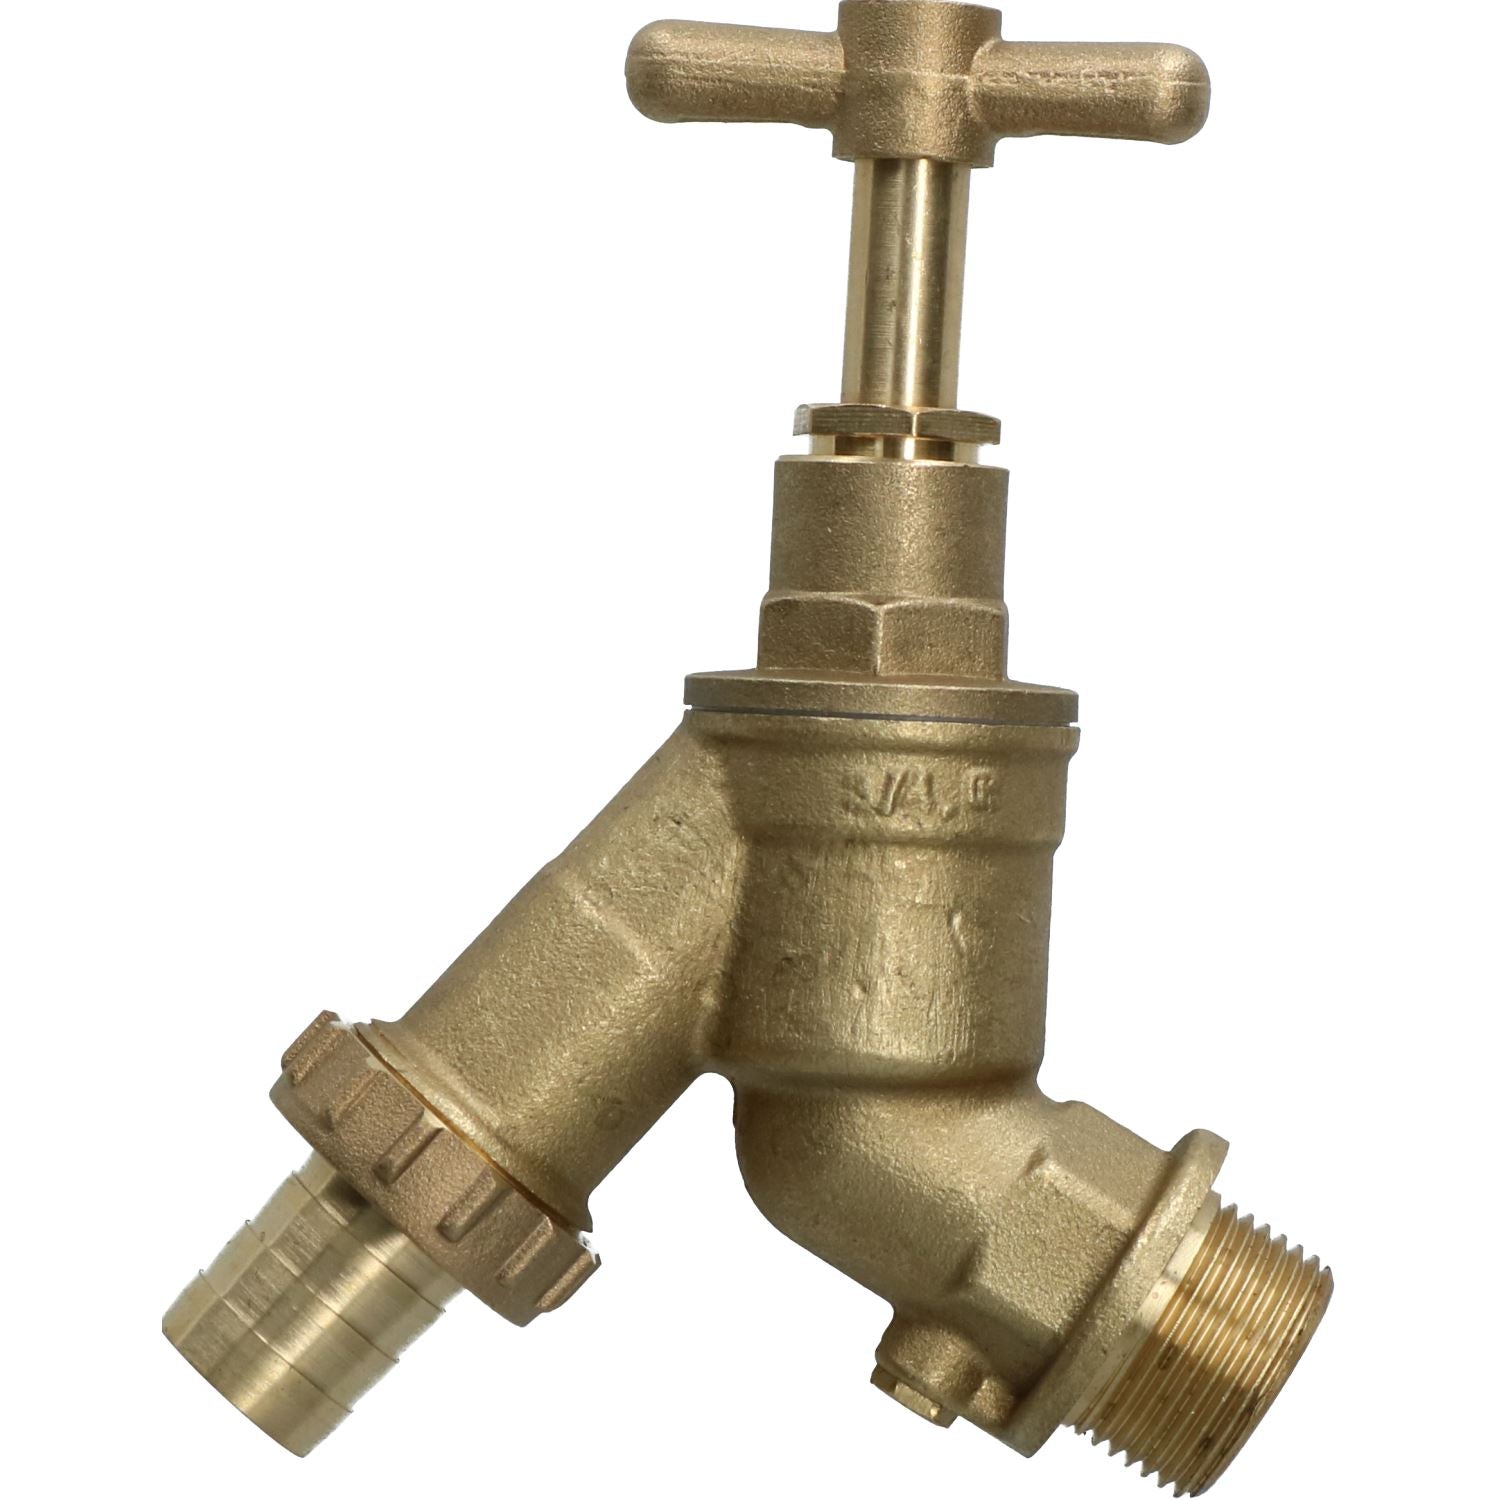 Large 3/4" High Flow Outside Garden Tap with Double Check Valve 3/4"